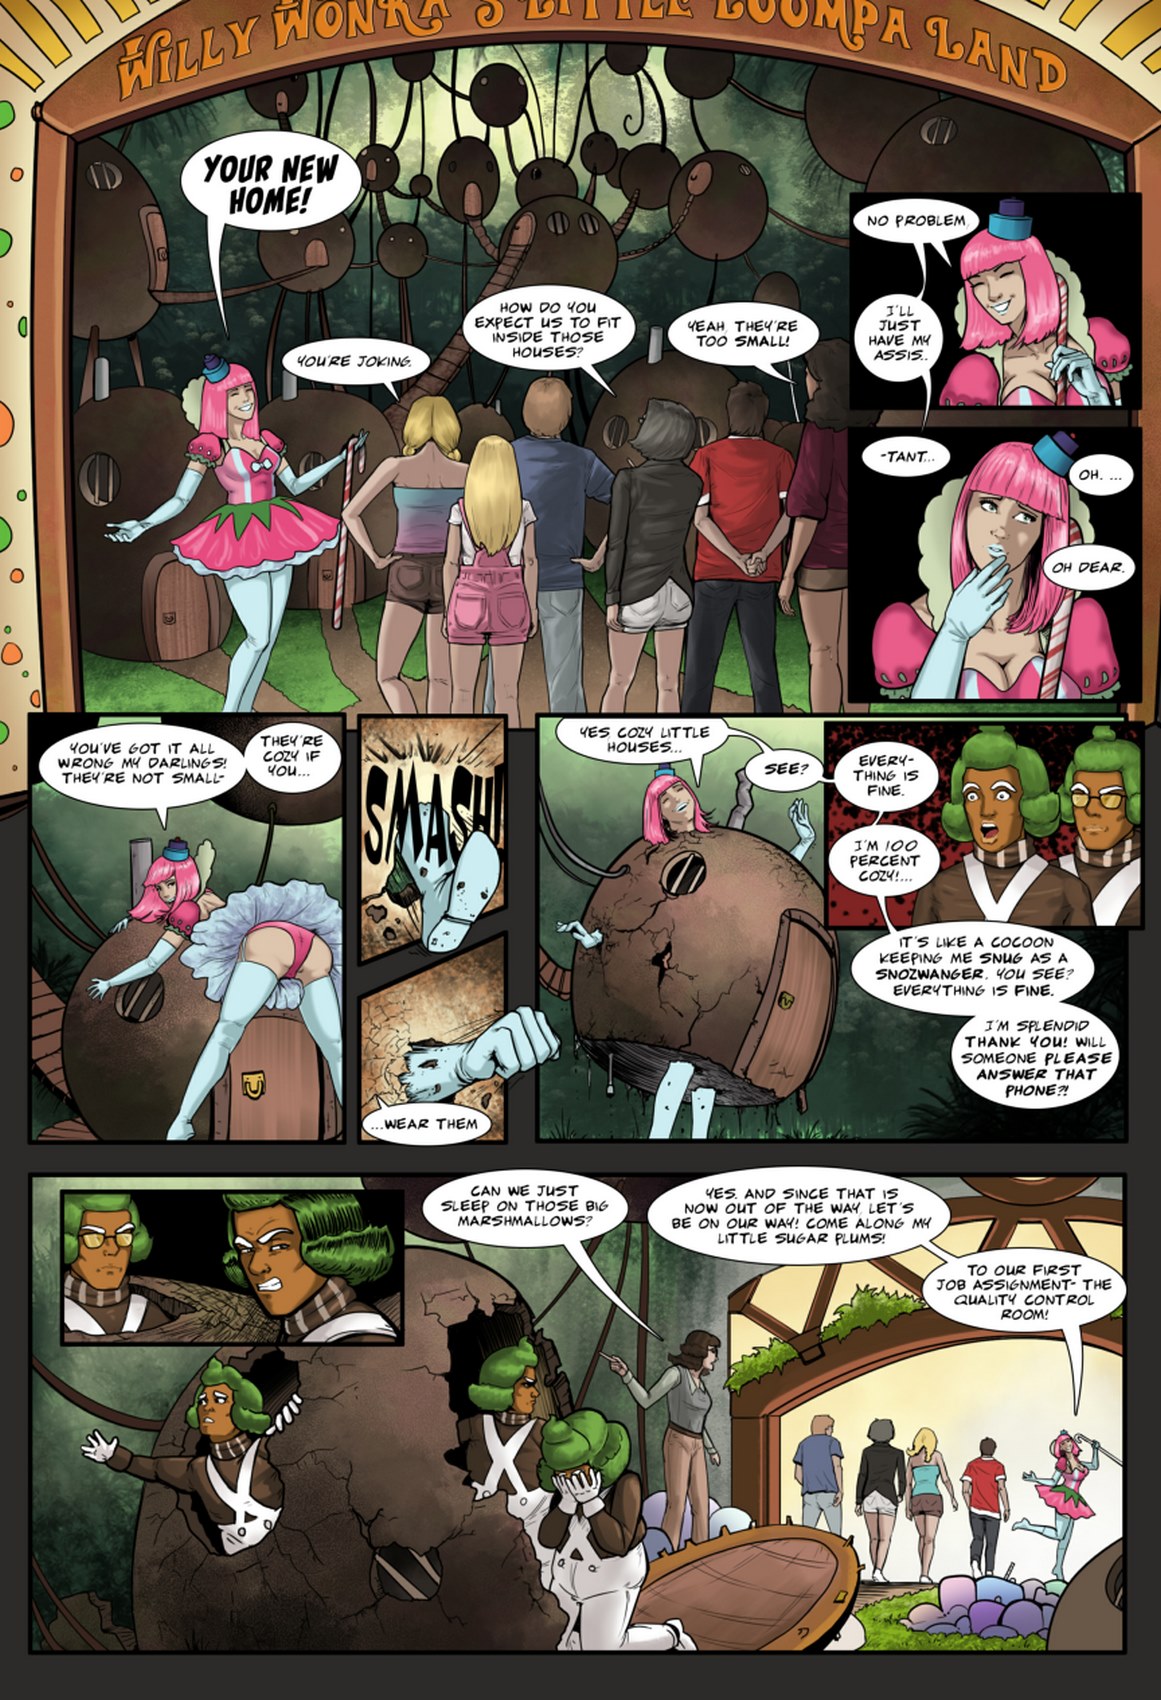 Wendy Wonka and the Chocolate Fetish Factory - Ch.2 Issue 2.